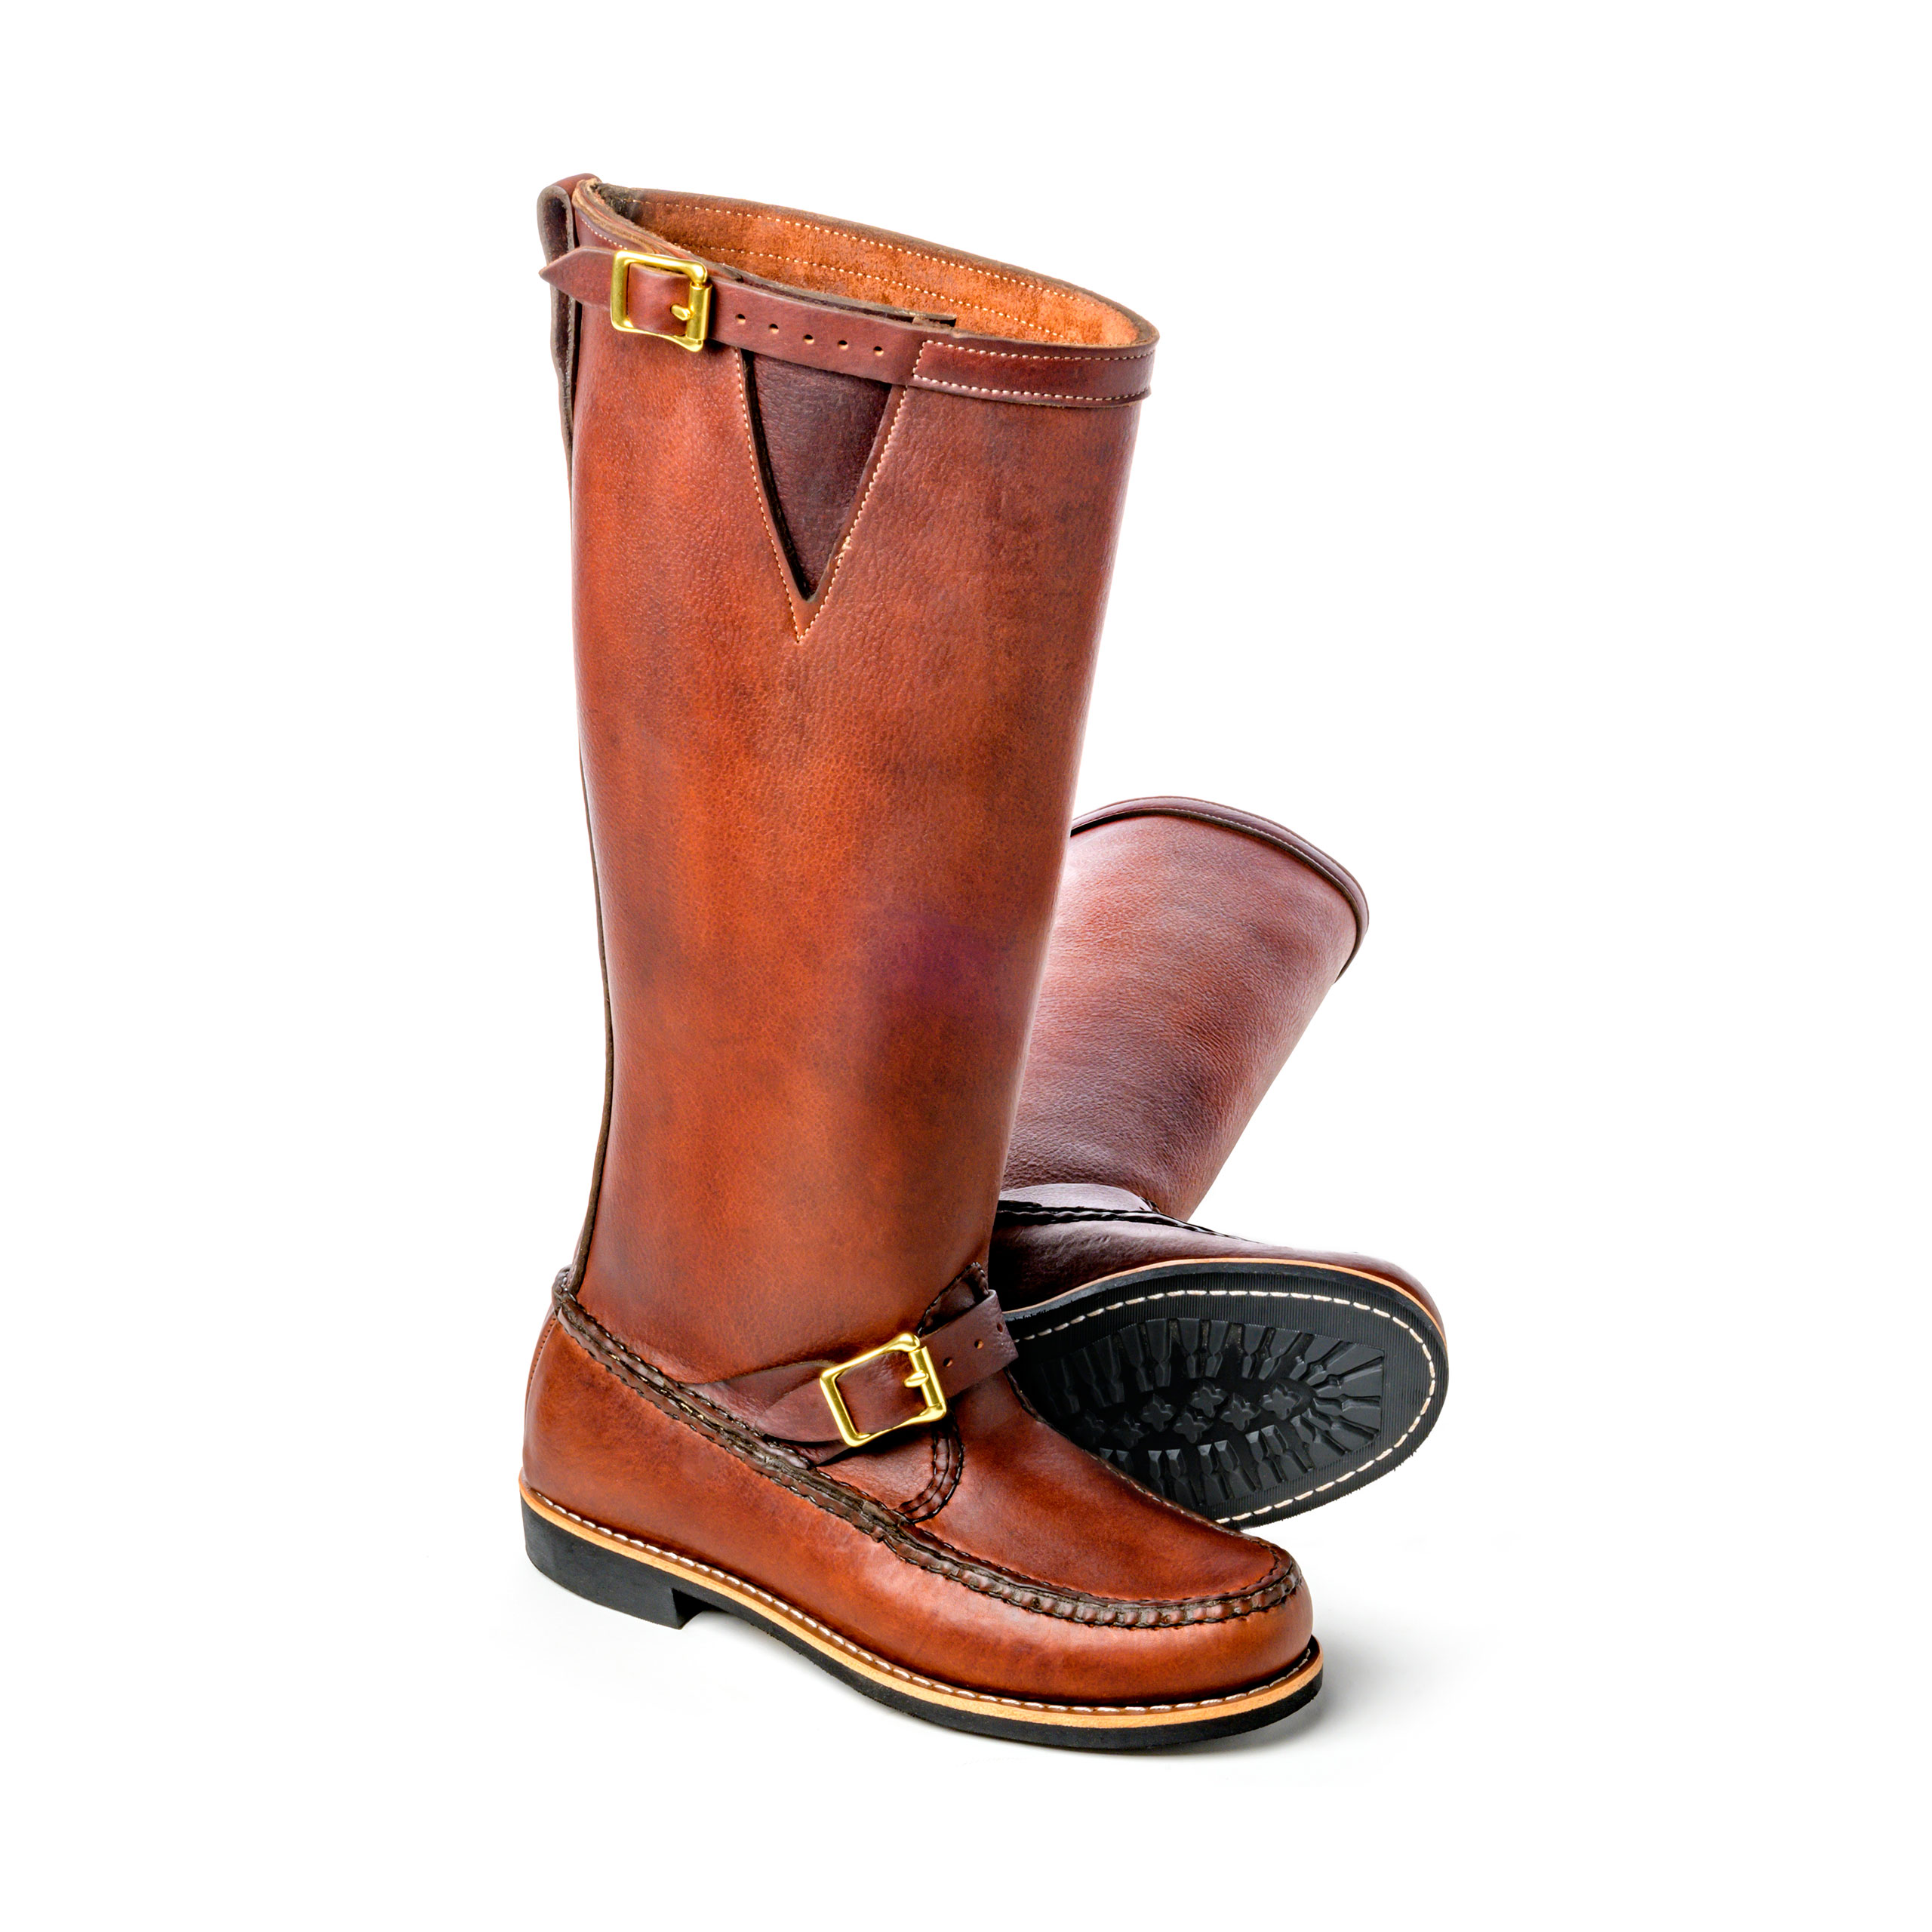 water moccasin skin boots